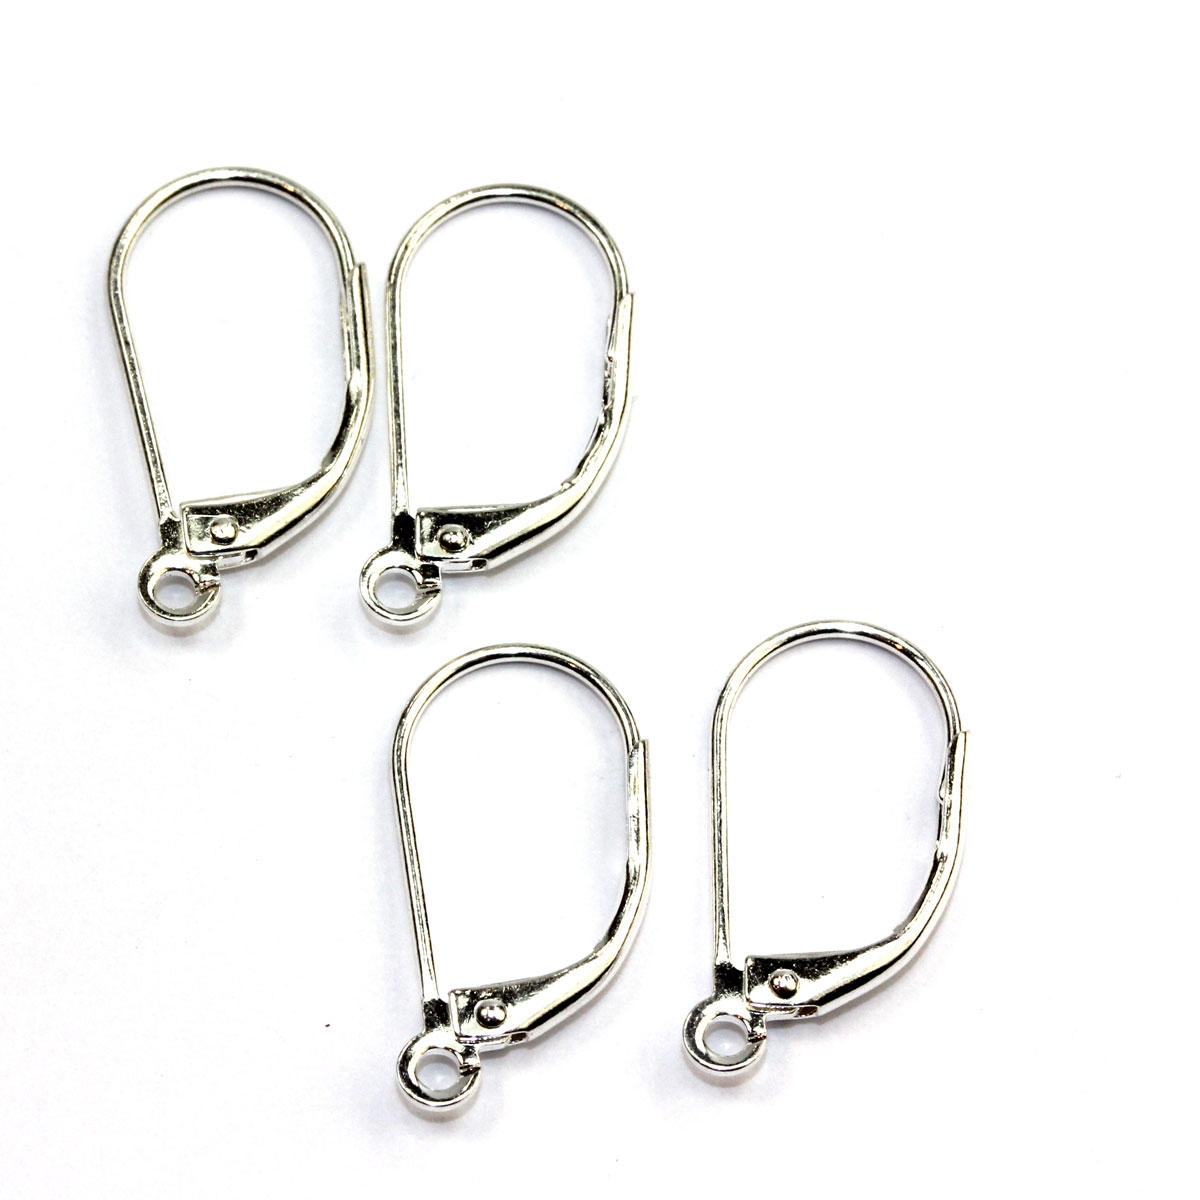 Silver Large Eurowire Earring Fitting